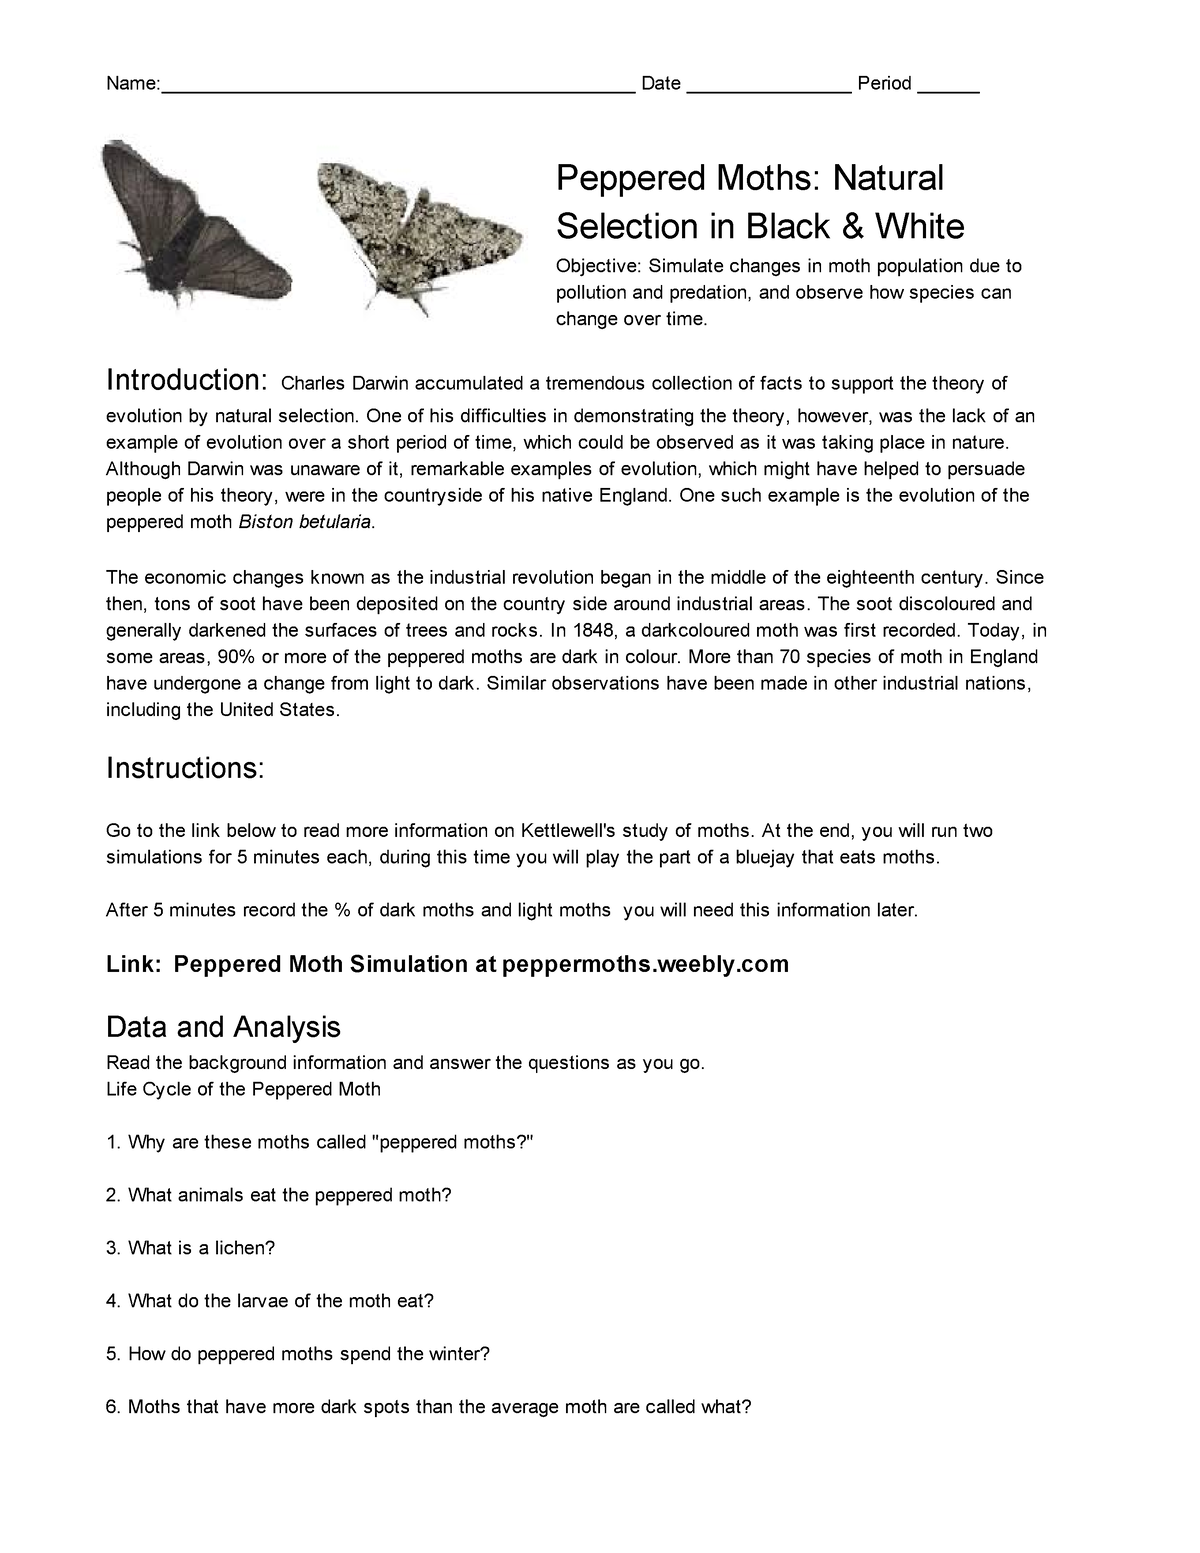 Peppered Moths Activity for Evolution and Natural Selection Studocu